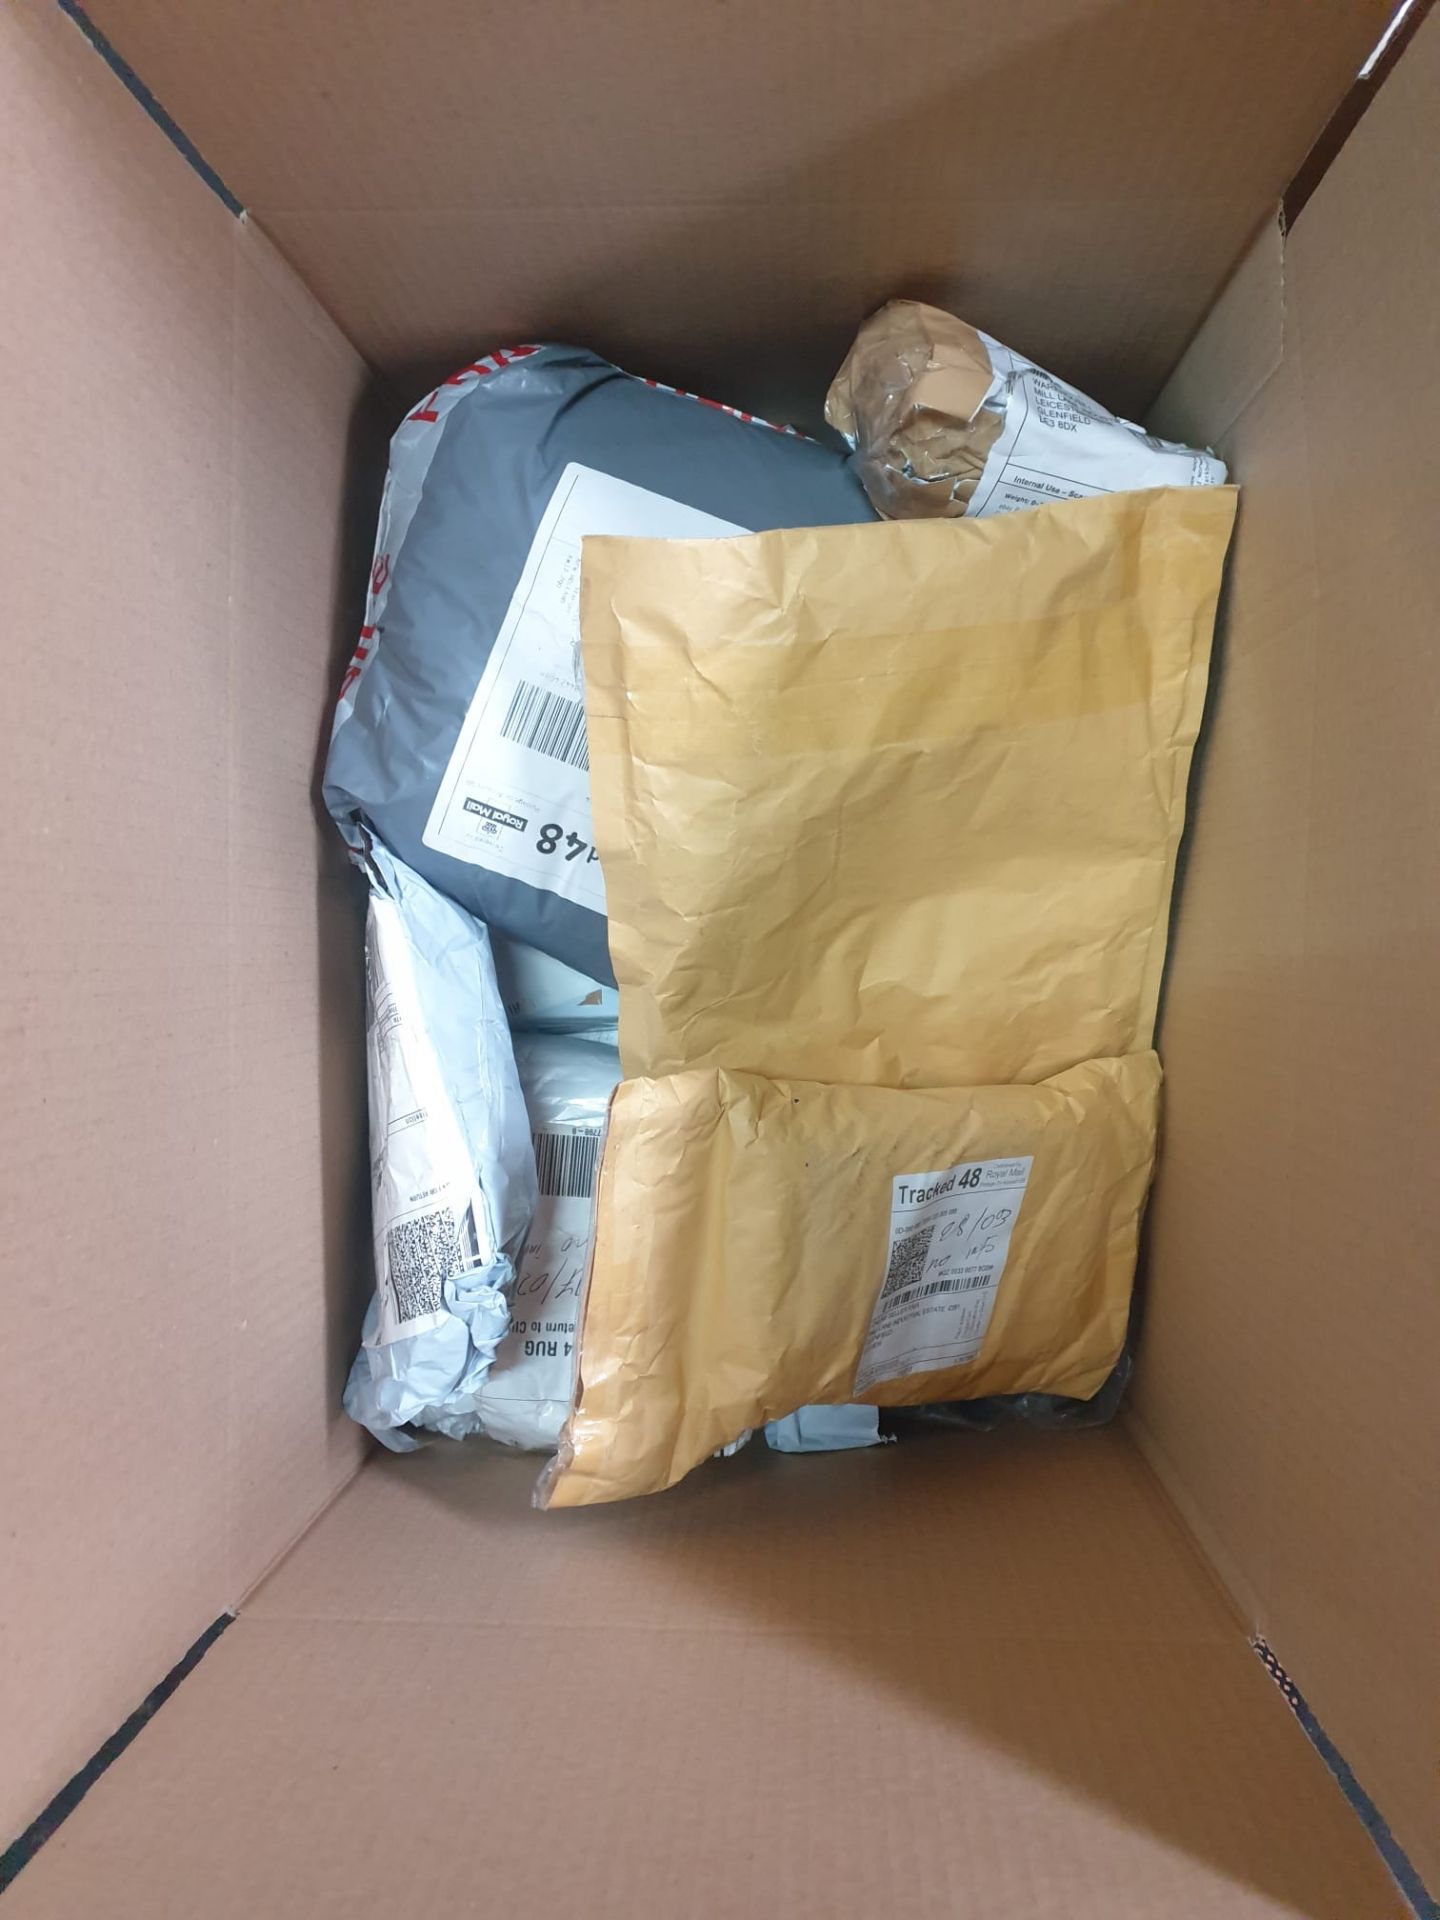 MEGA BULK LOT TO CONTAIN 500 x UNCHECKED COURIER/INTERNET RETURNS. CONDITION & ITEMS UNKNOWN. - Image 4 of 11